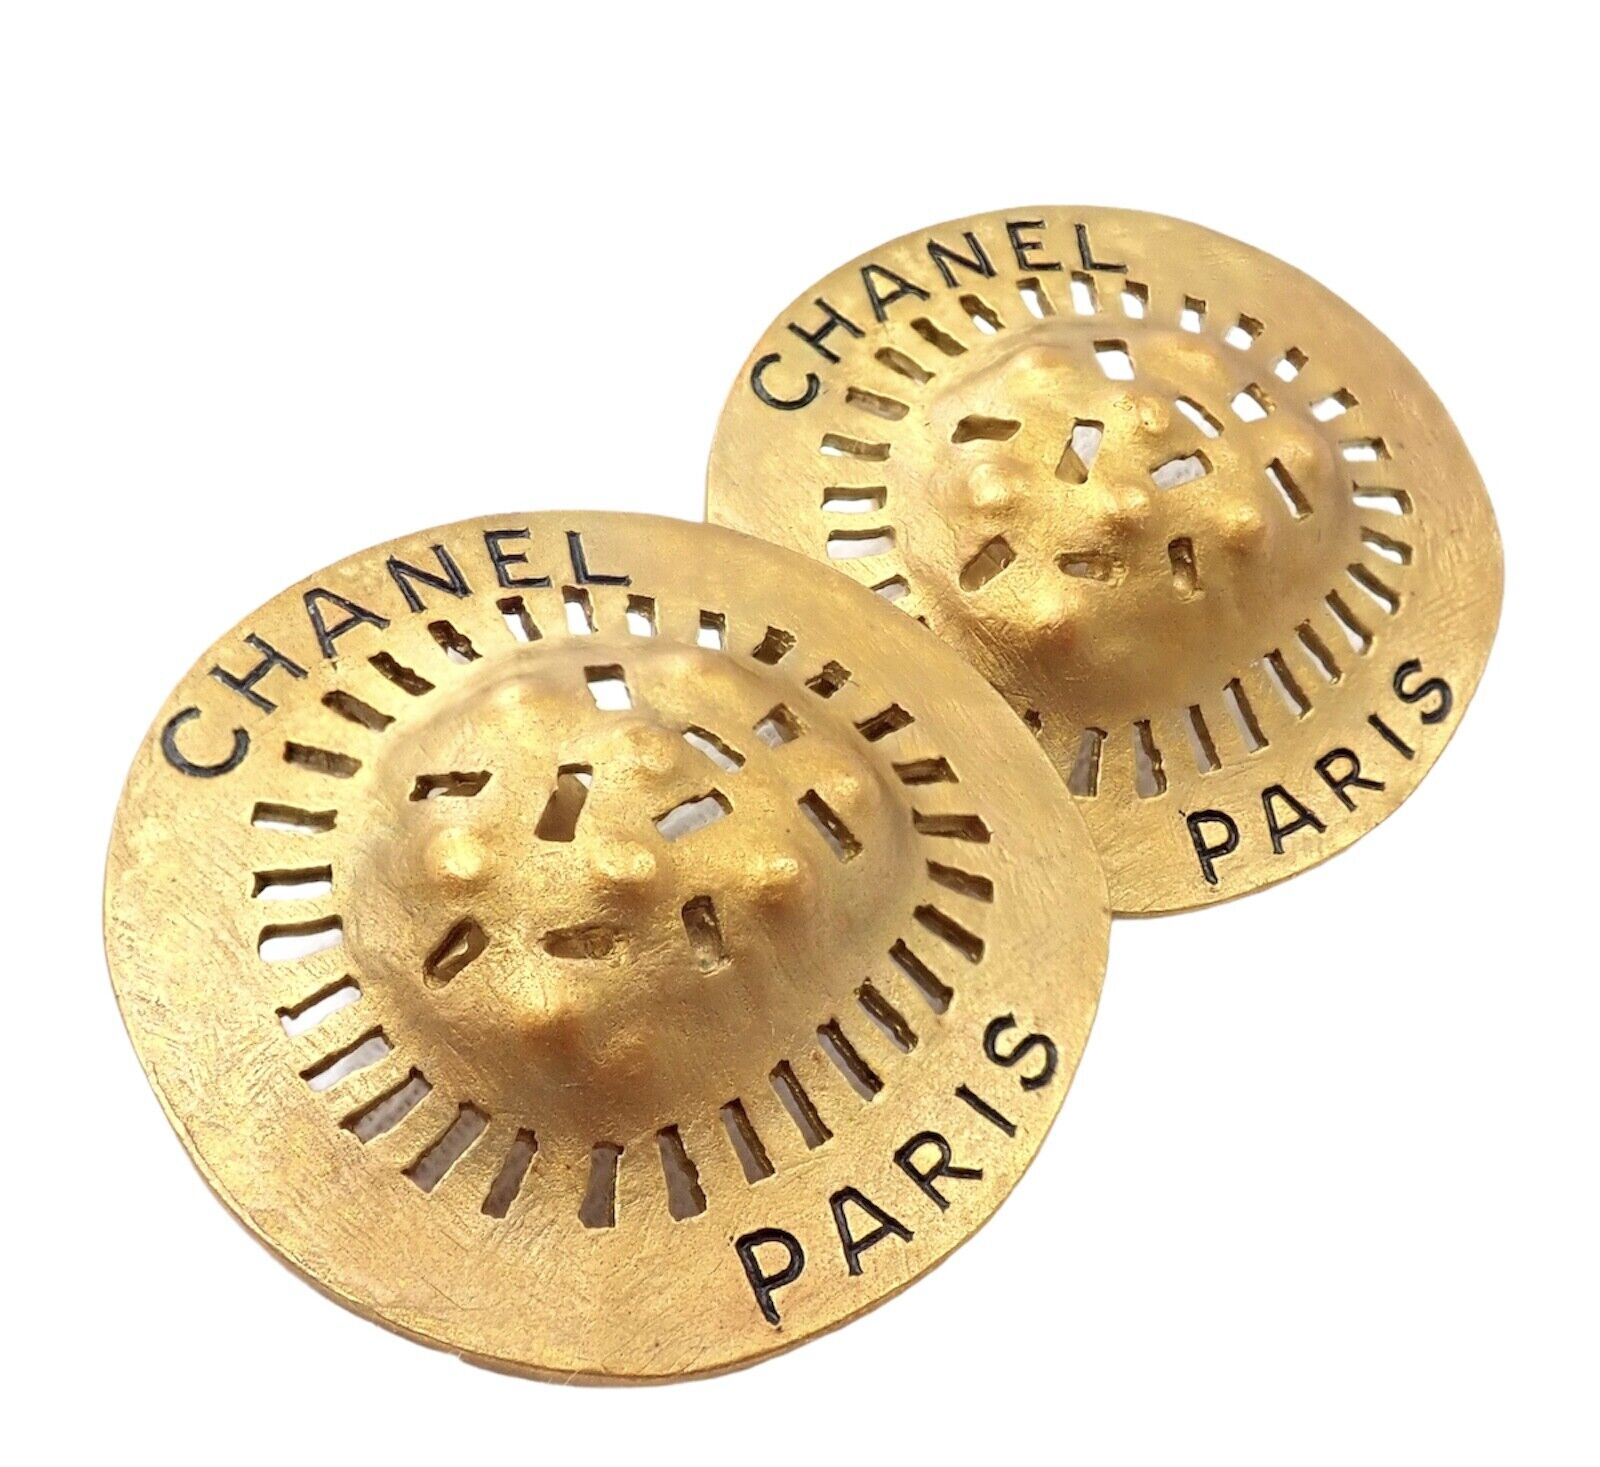 Chanel Jewelry & Watches:Fashion Jewelry:Earrings Rare! Vintage Chanel Paris France Medallion Earrings 1994 Fall Collection